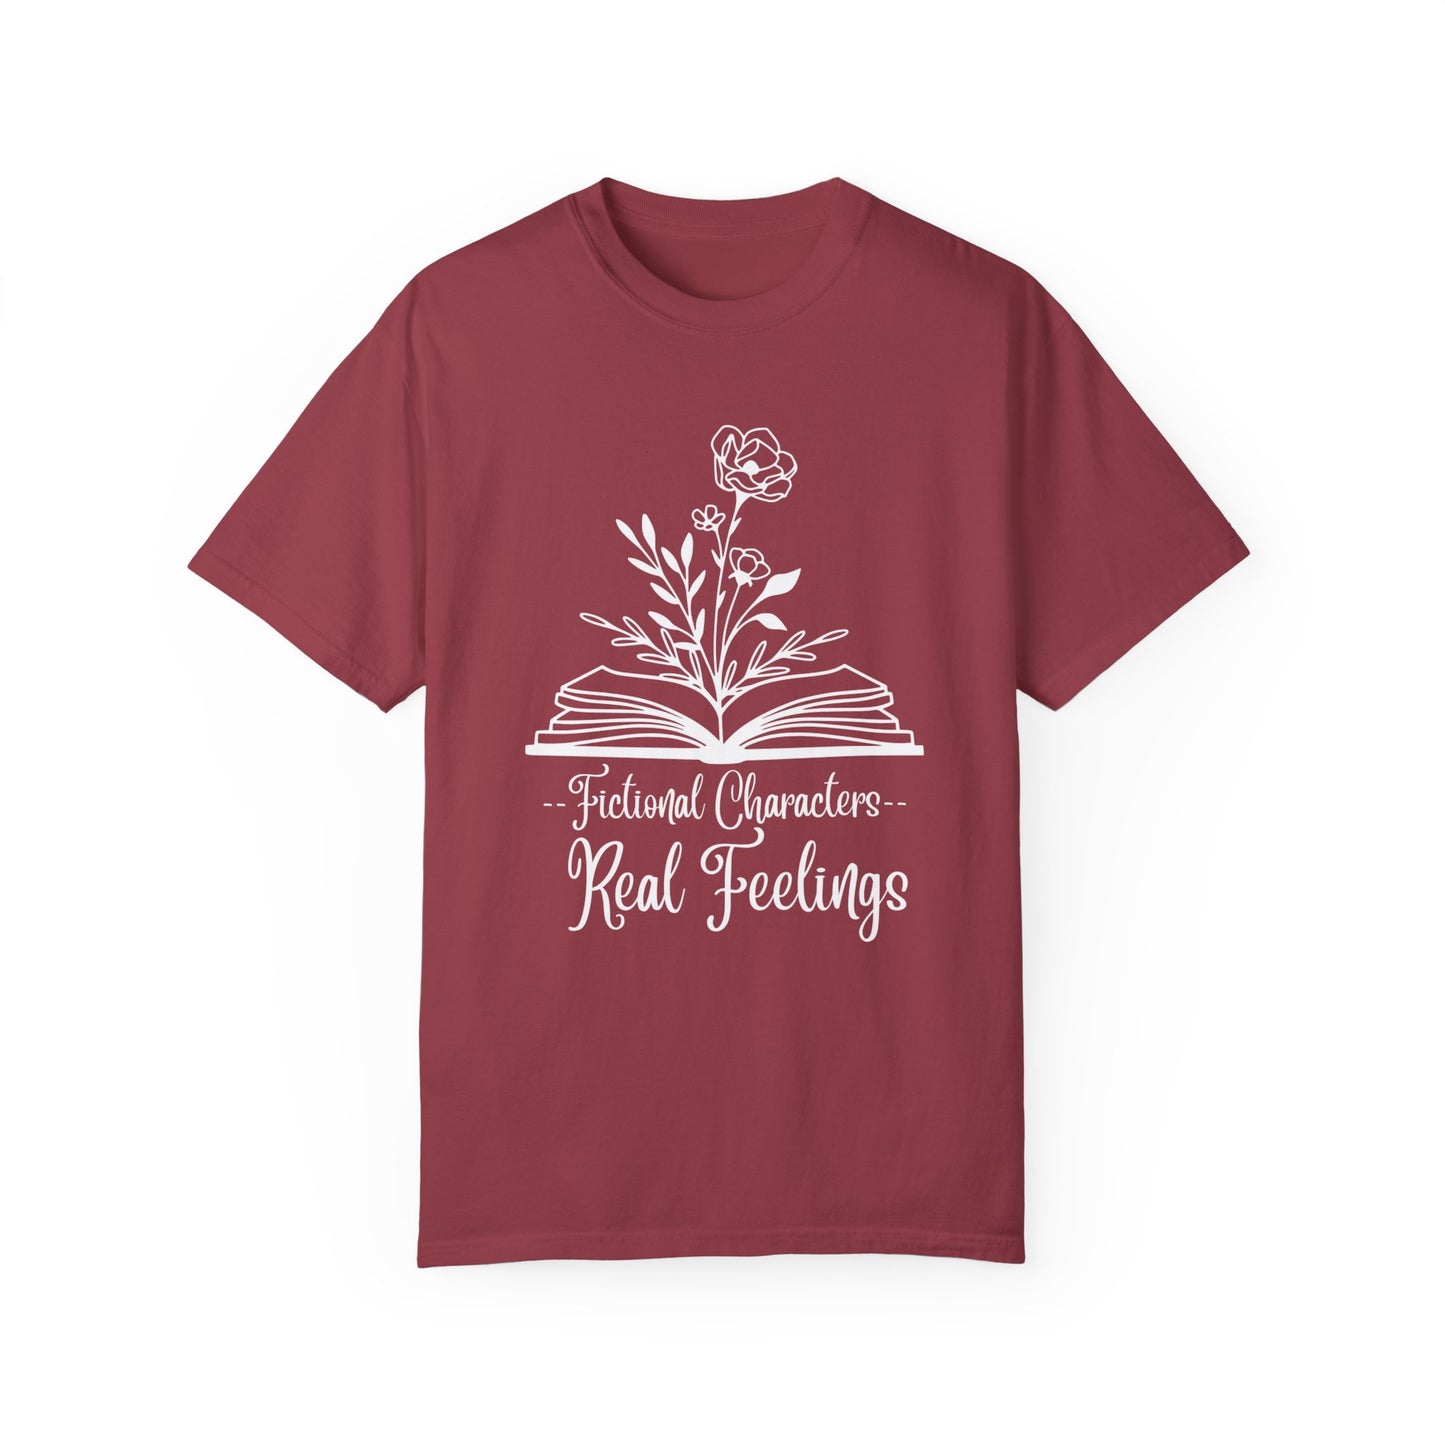 Fictional Characters Real Feelings T-shirt - Book Lovers